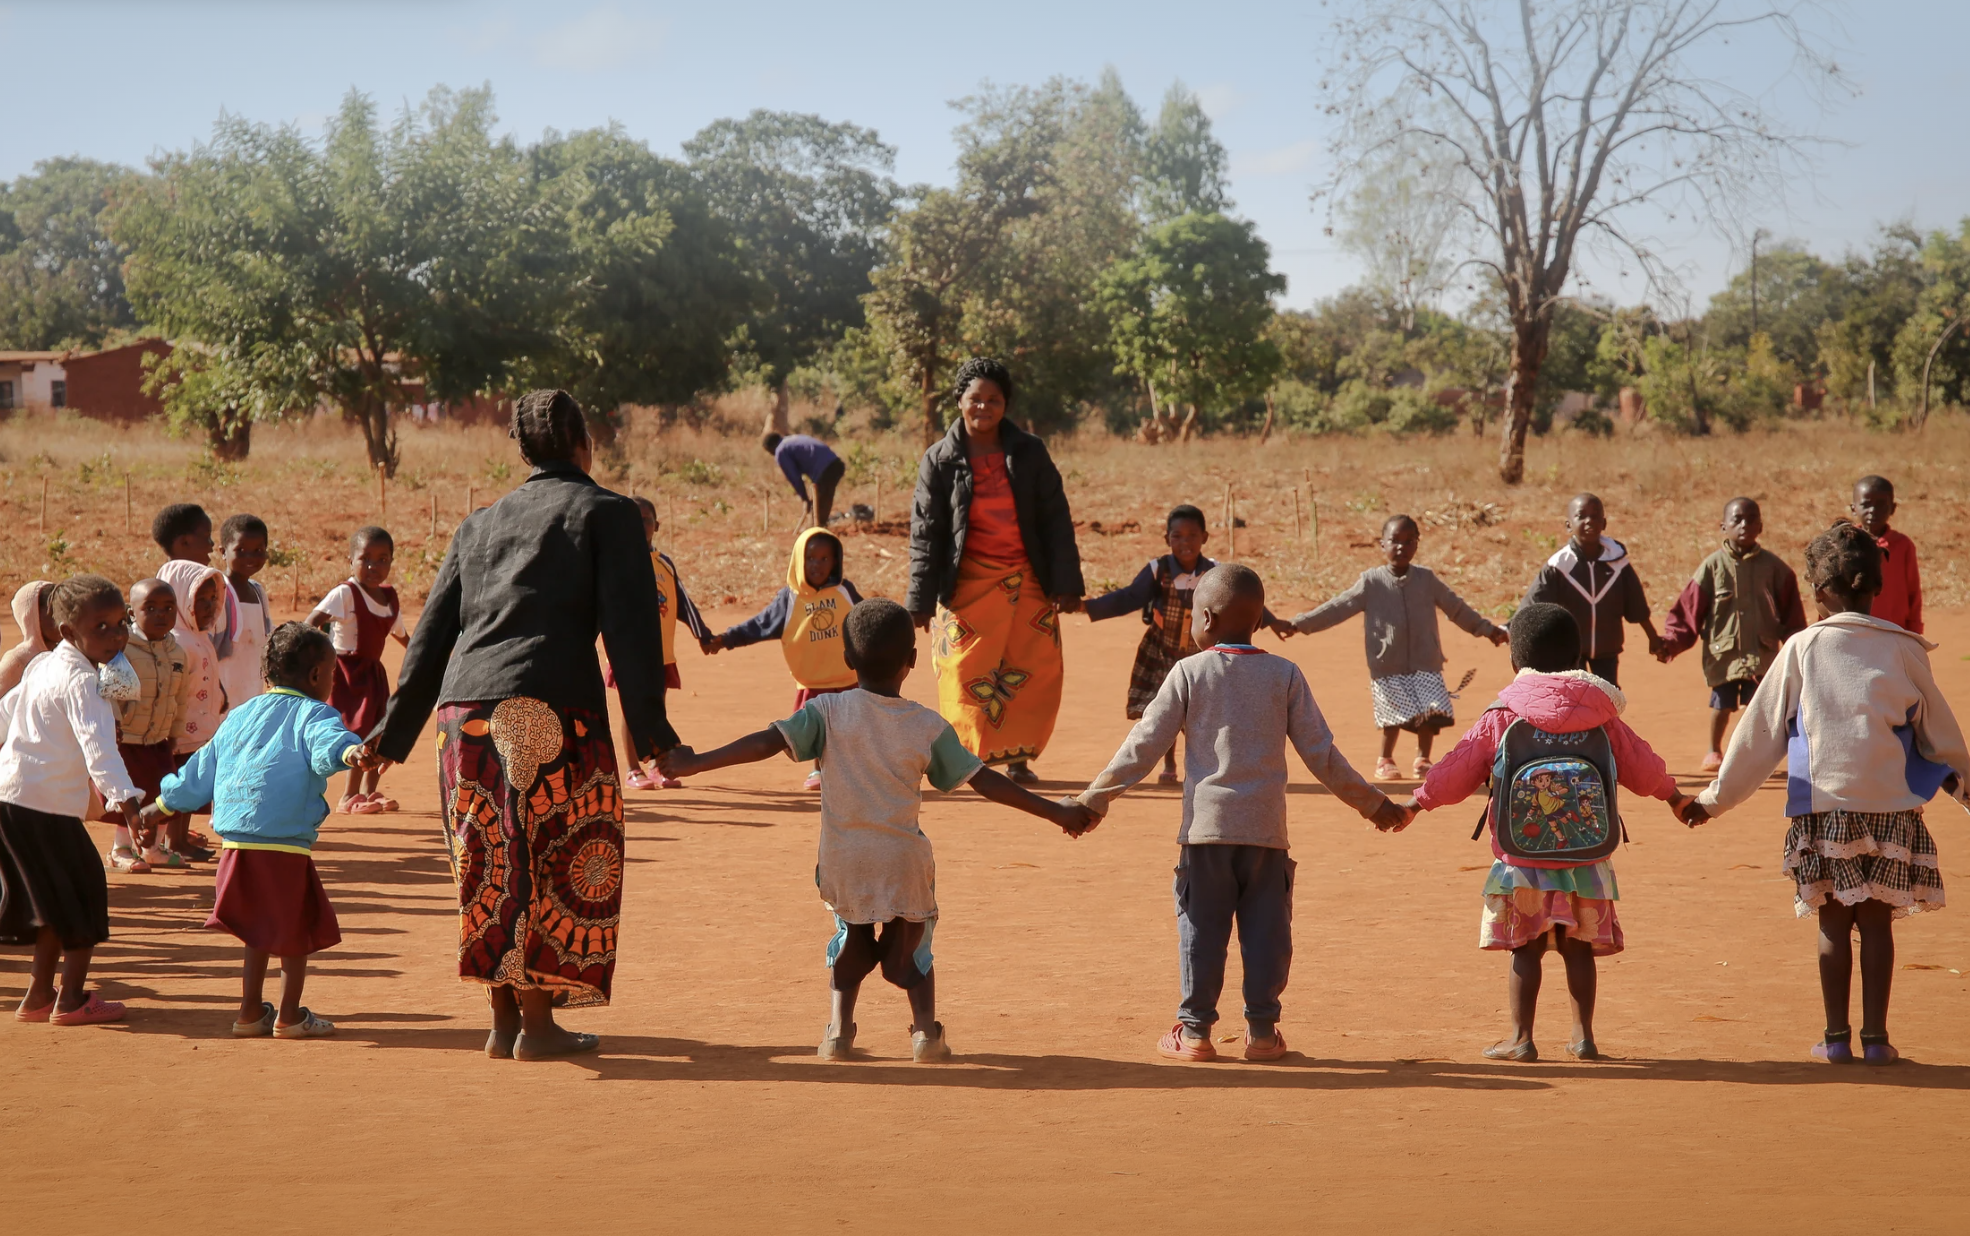 Teachers and children holding hands in a big circle outdoors